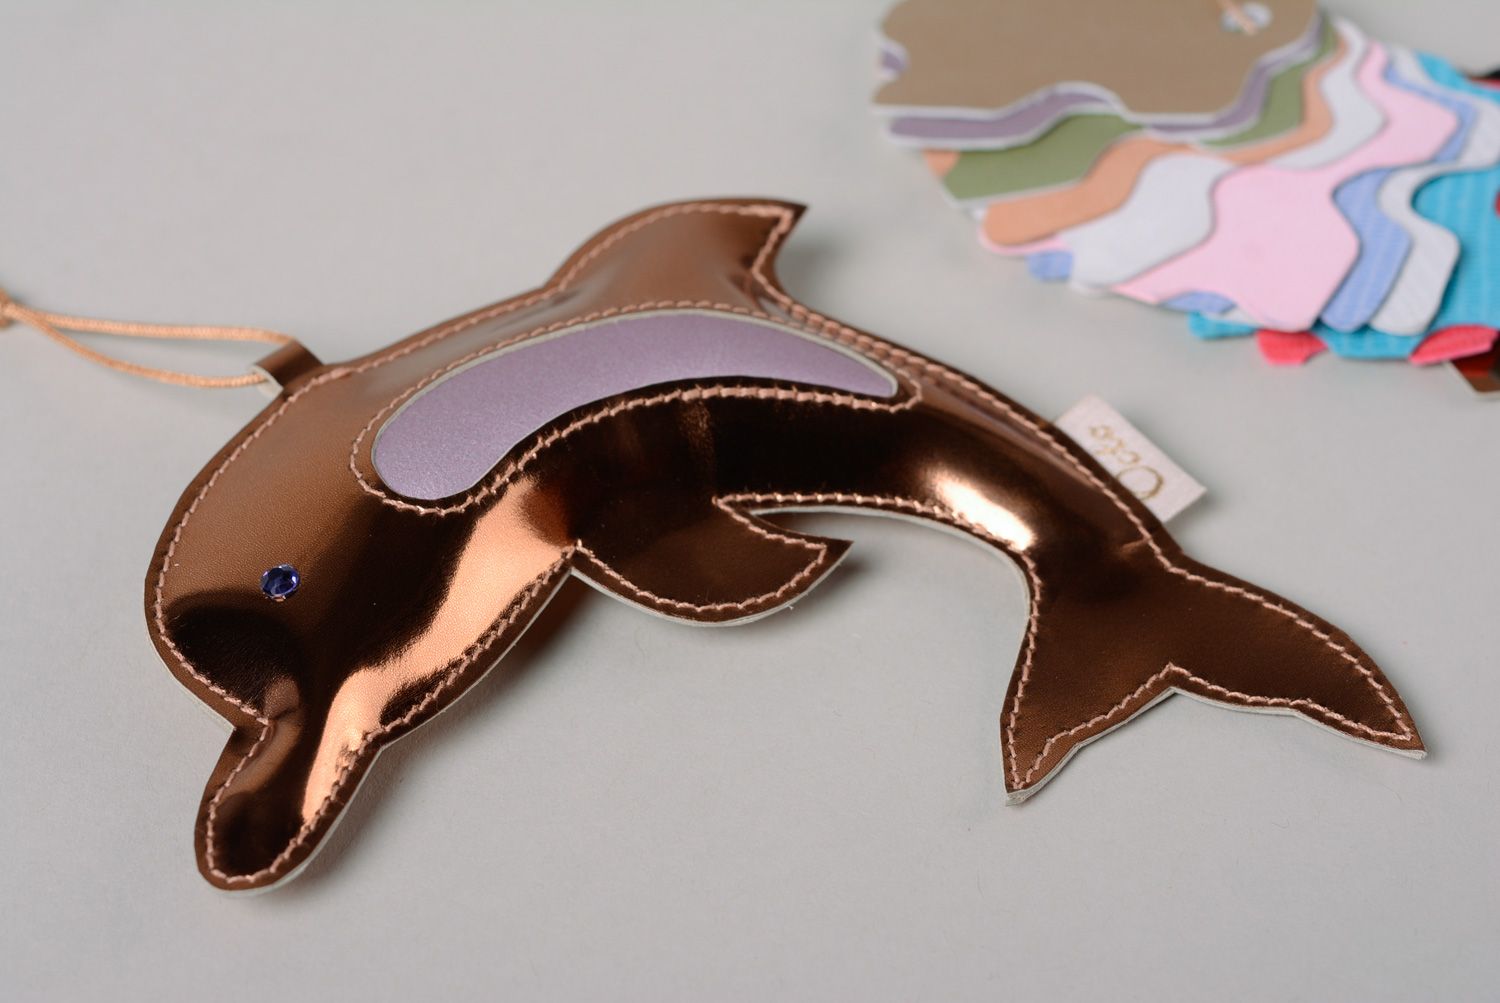 Handmade leather bag charm in the shape of dolphin keychain photo 5